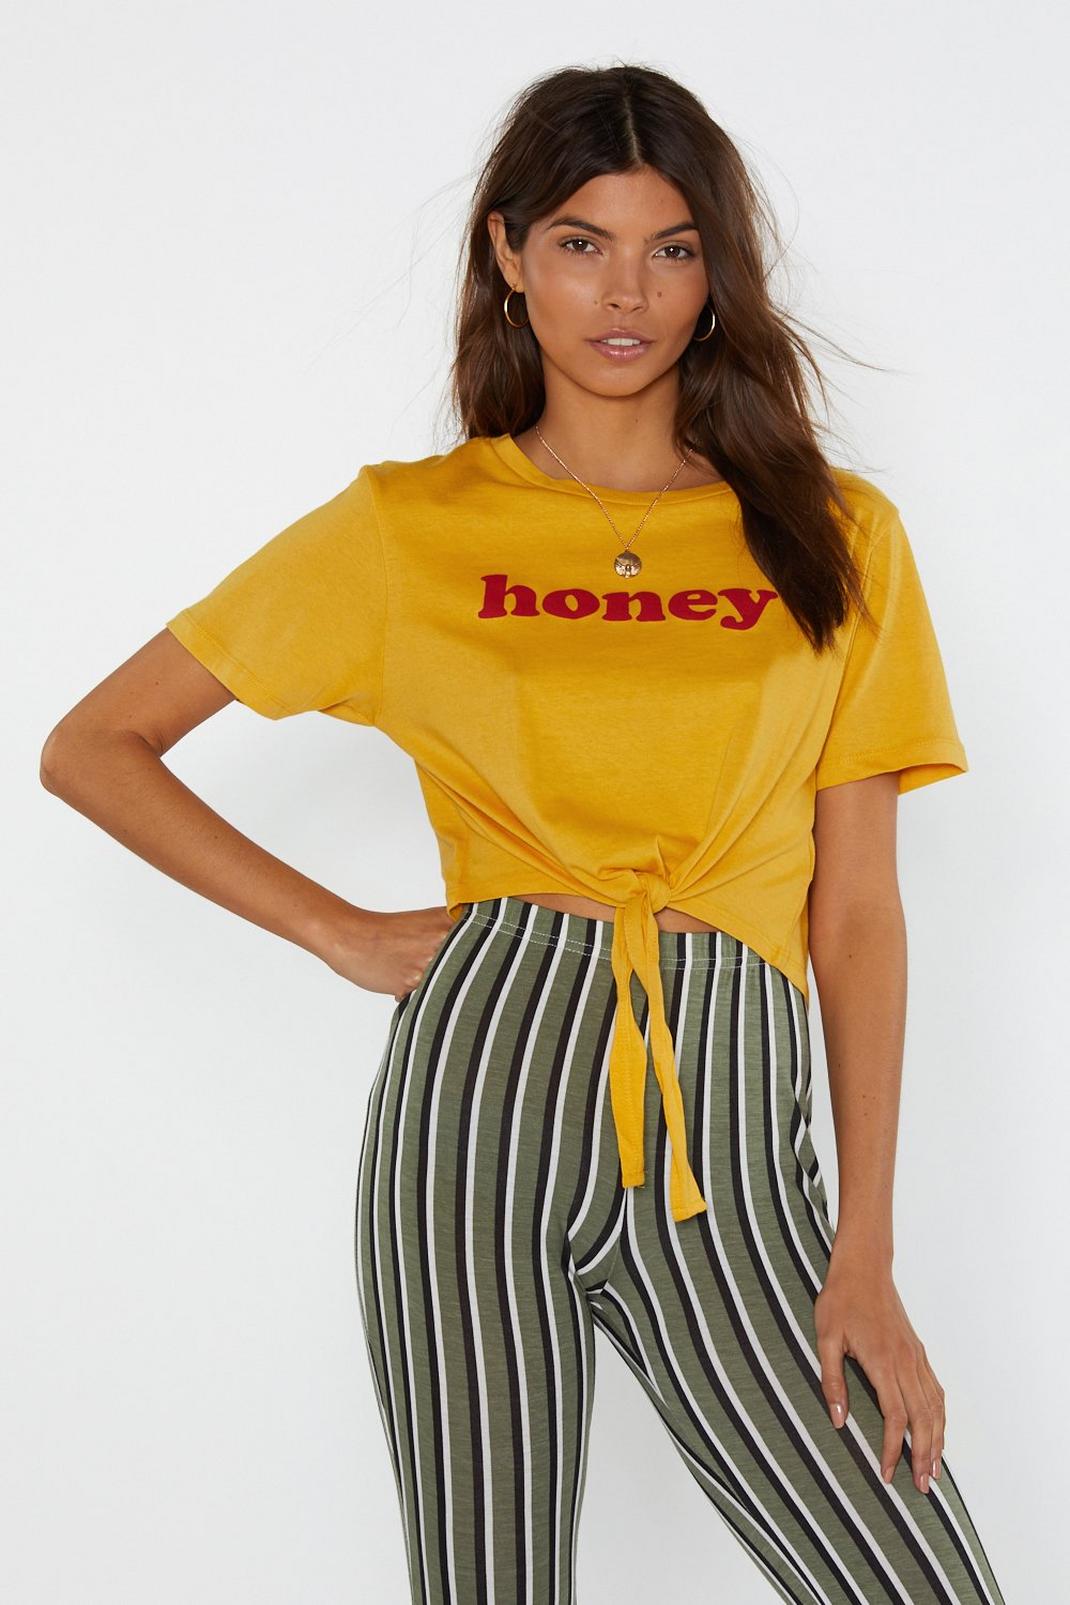 Oh Honey Graphic Tee image number 1